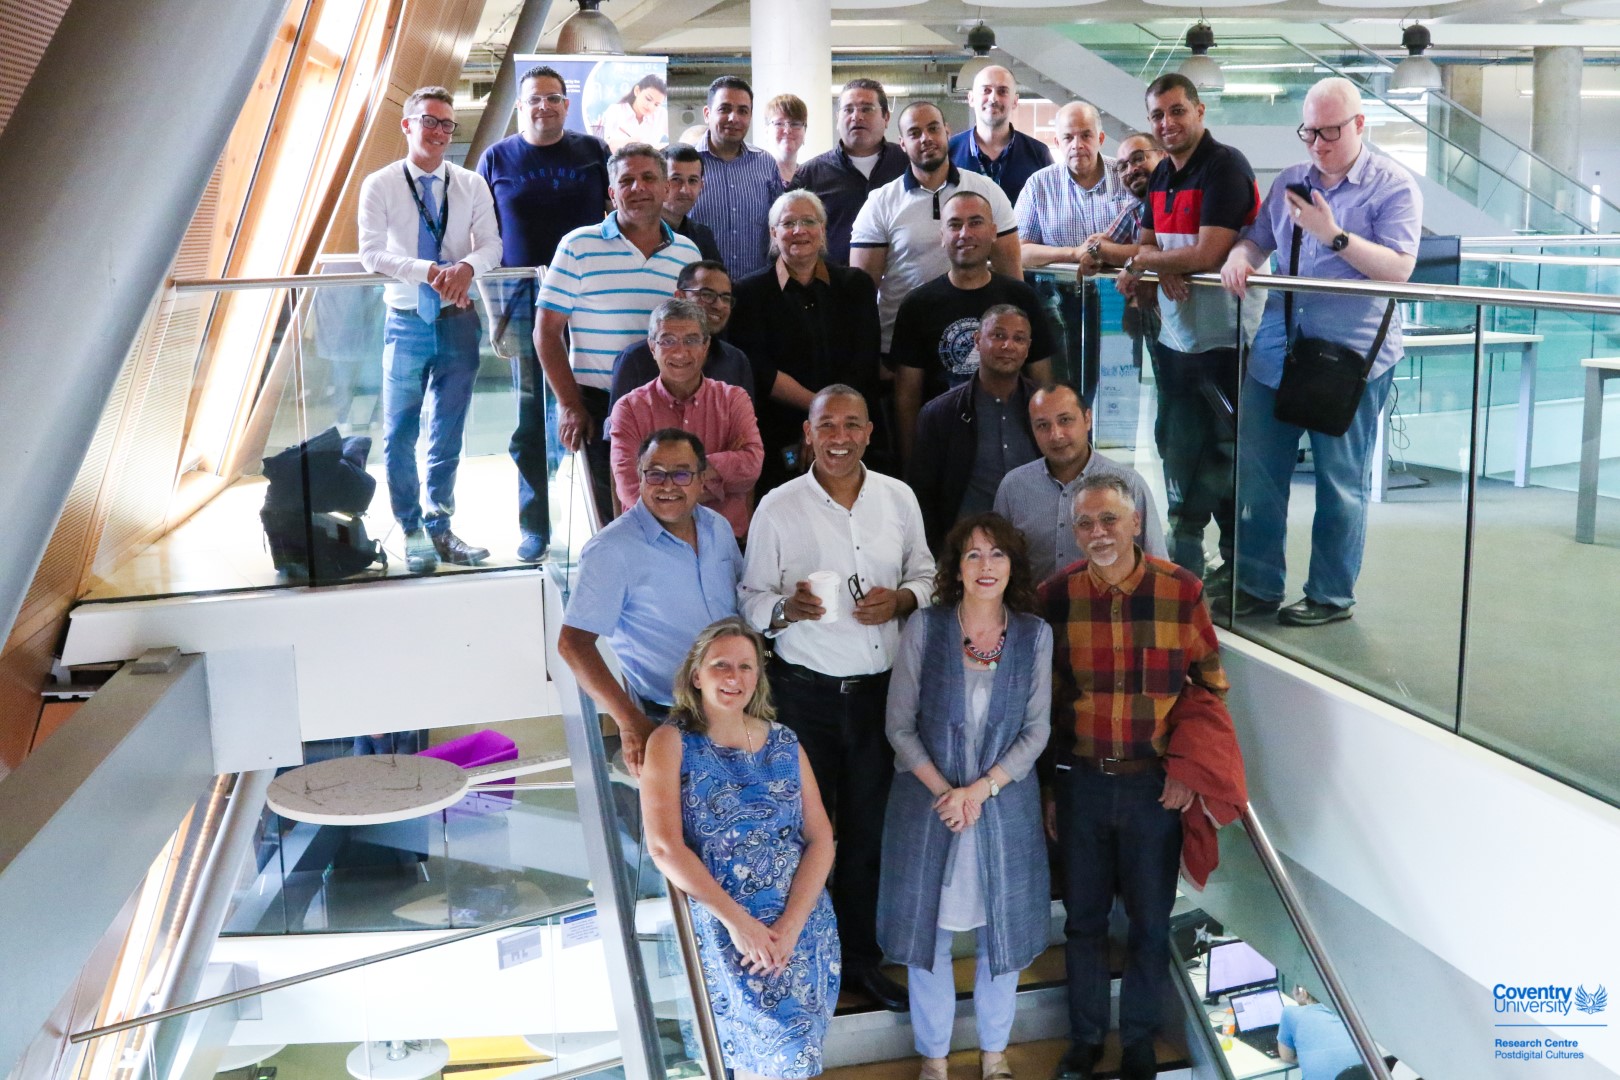 Third Train the Trainers week held at Coventry University, 8-12 July 2019 (England)